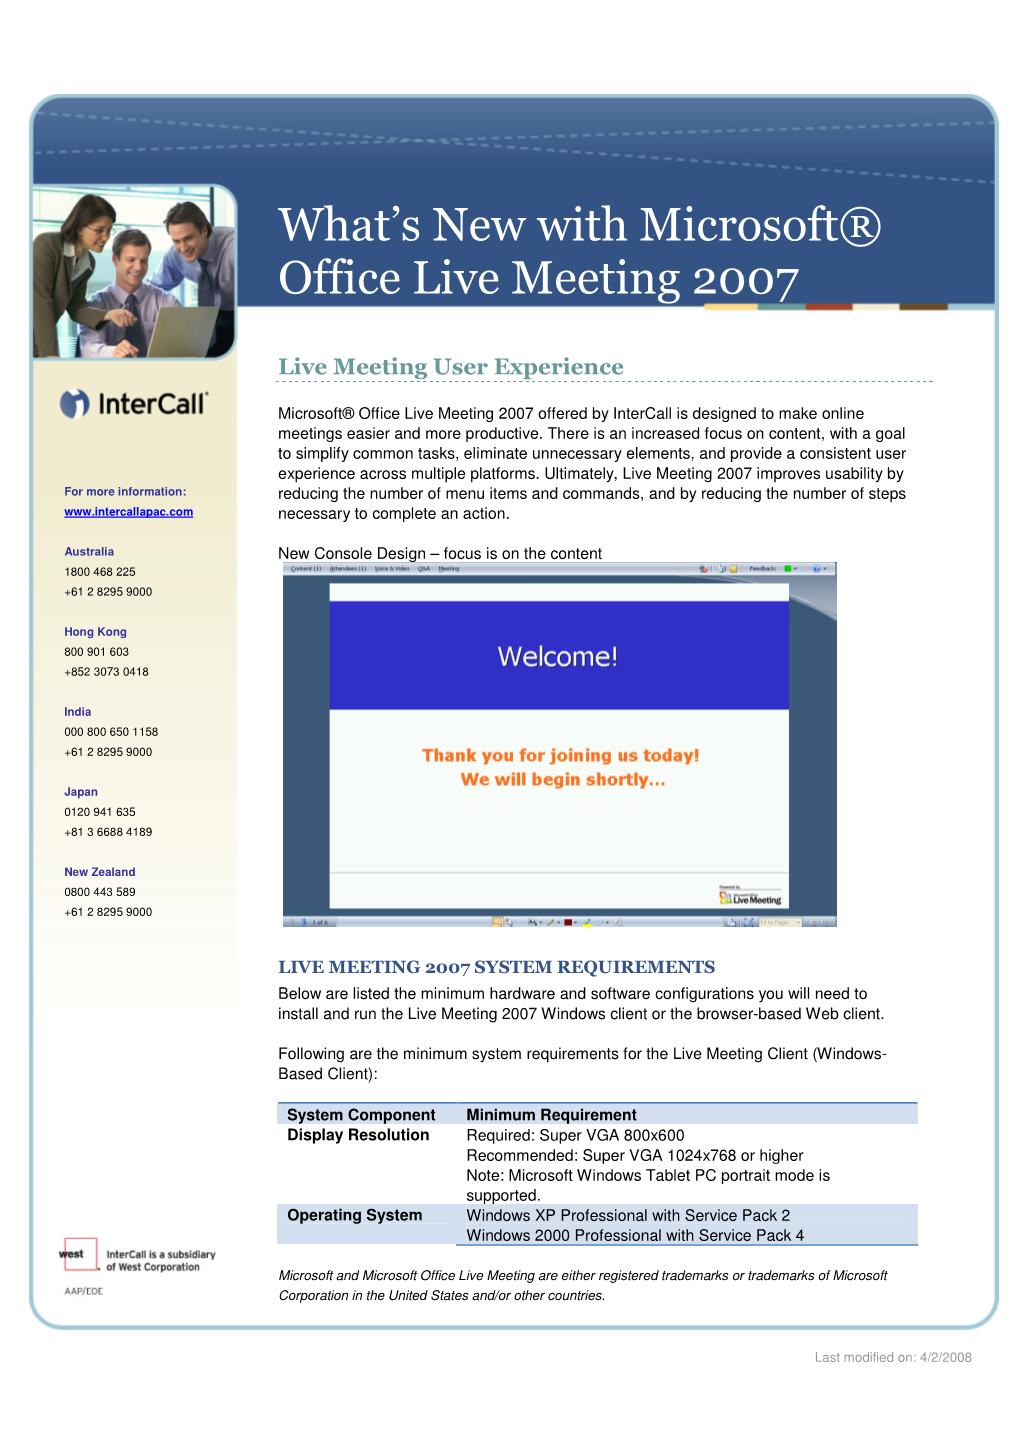 What's New with Microsoft® Office Live Meeting 2007